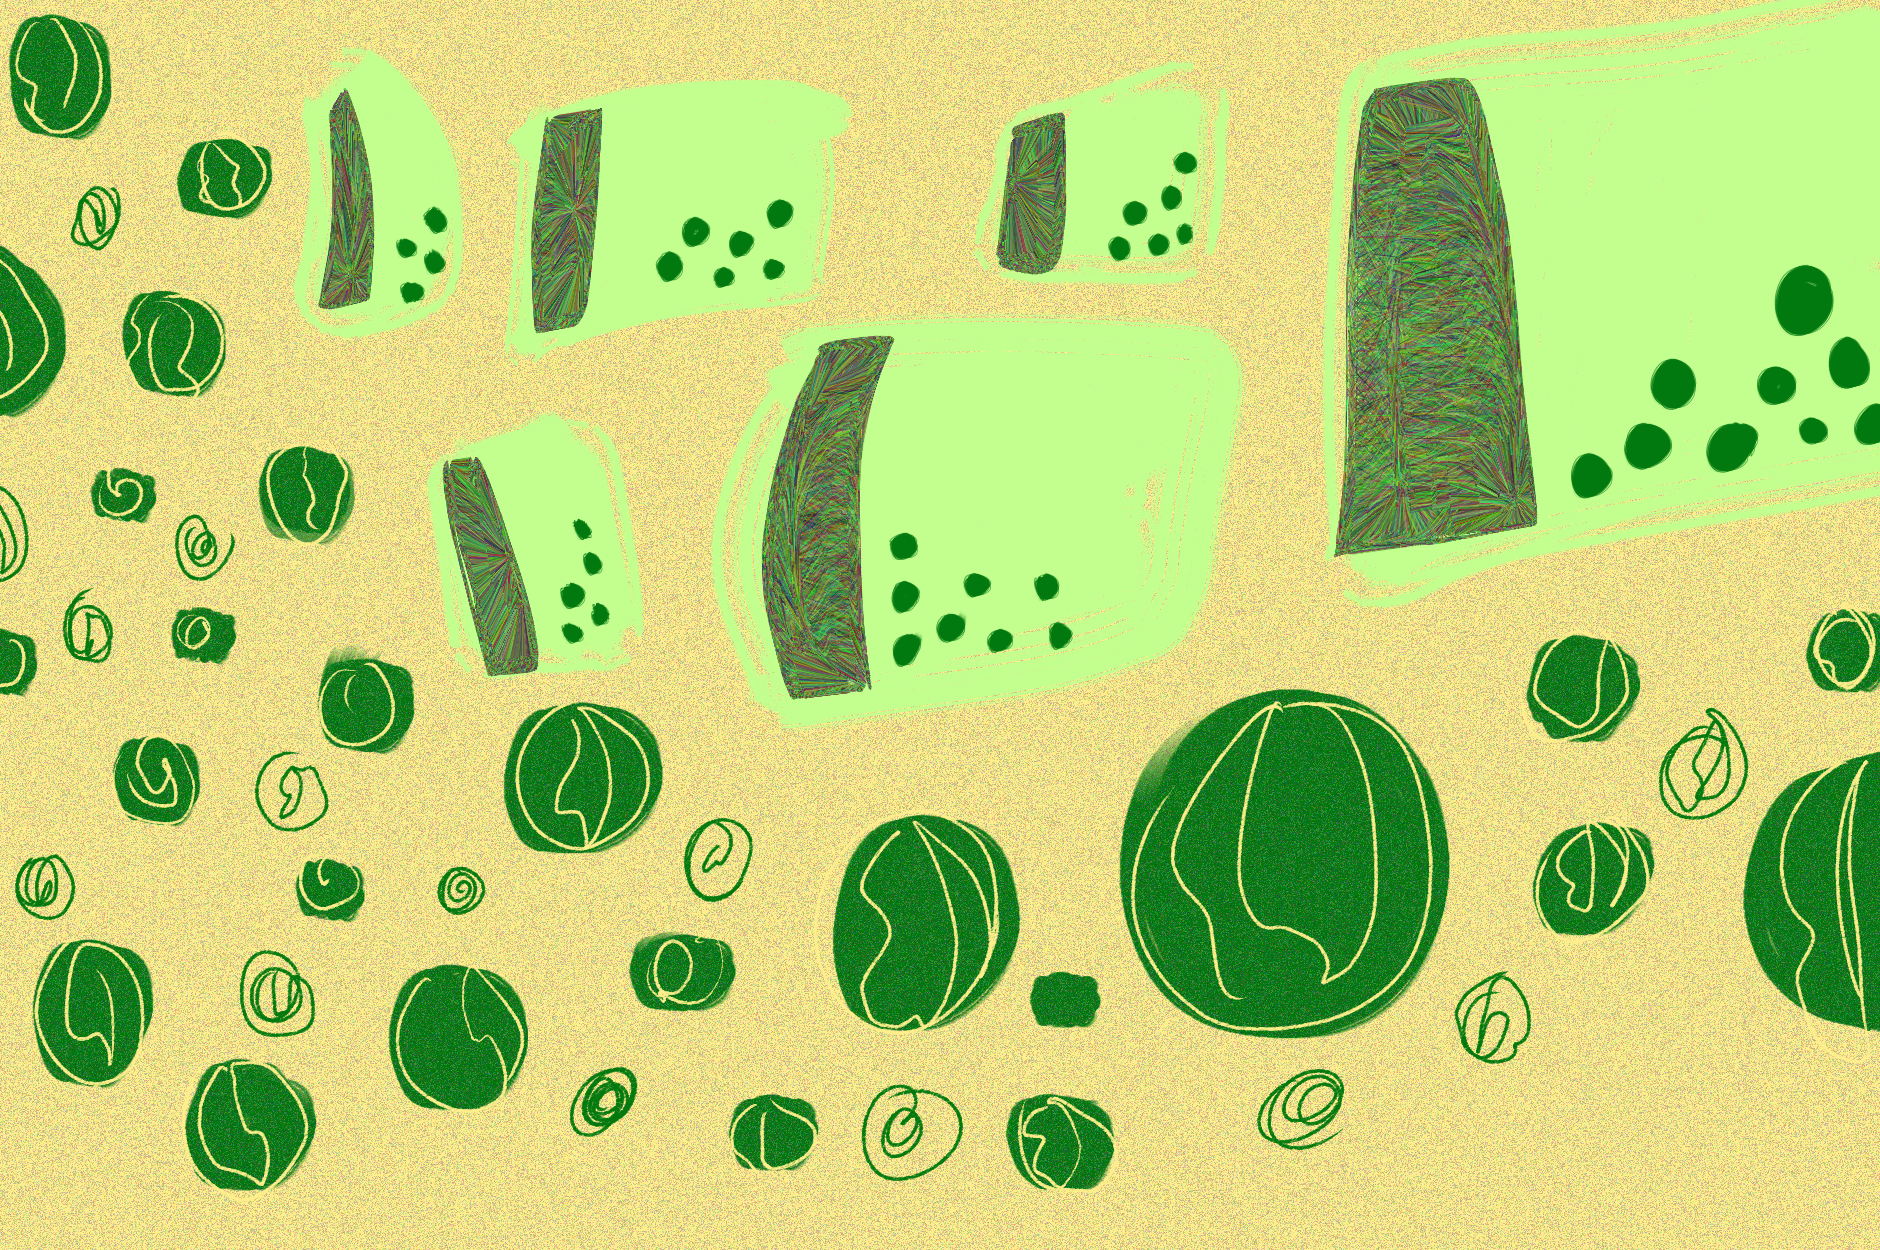 light green dotted jargon their sides, green spheres spilling out in bulk